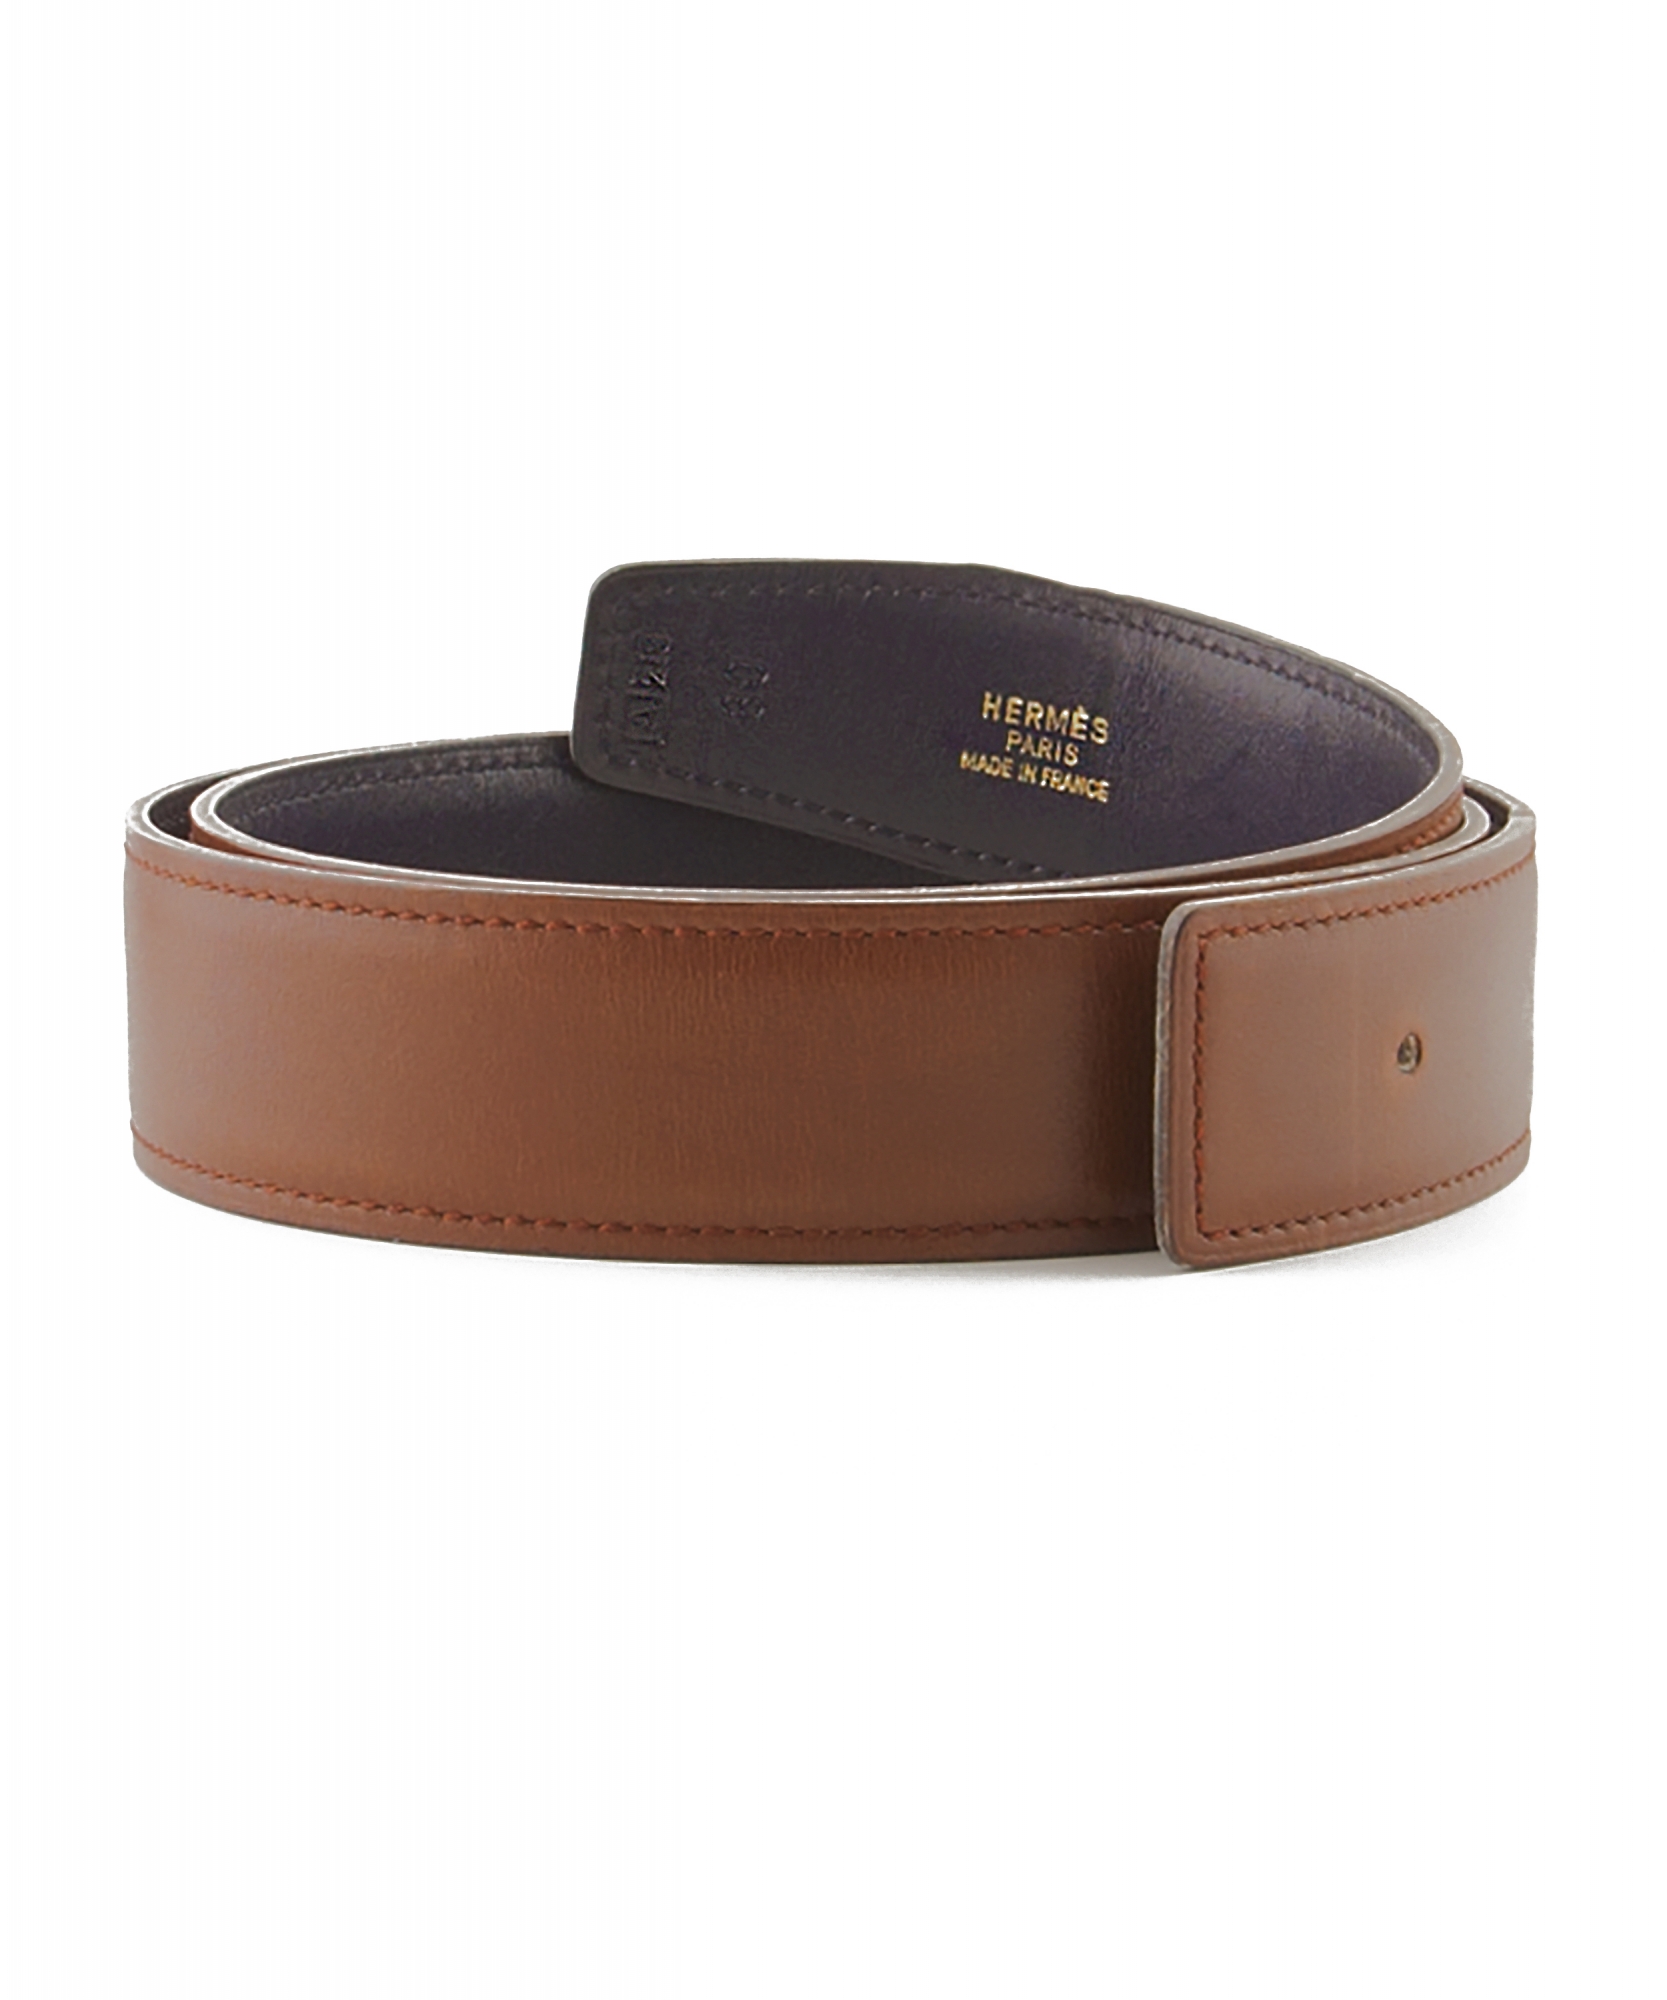 Reversible leather strap 32 mm